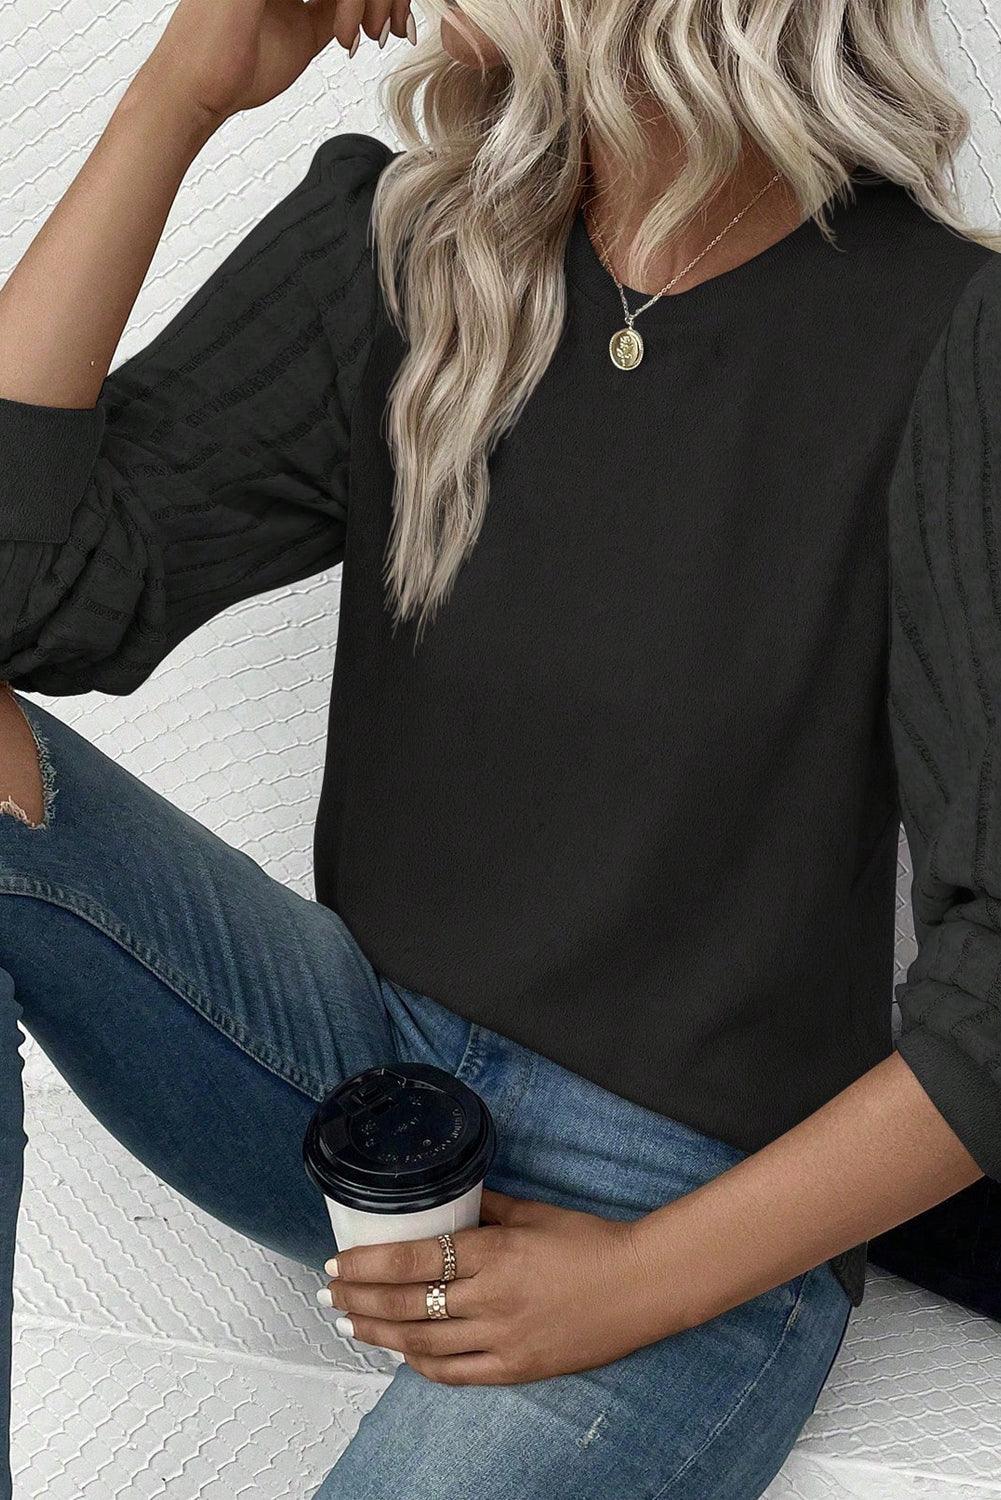 Black Knitted Long Sleeve Stretchy Crew Neck Top